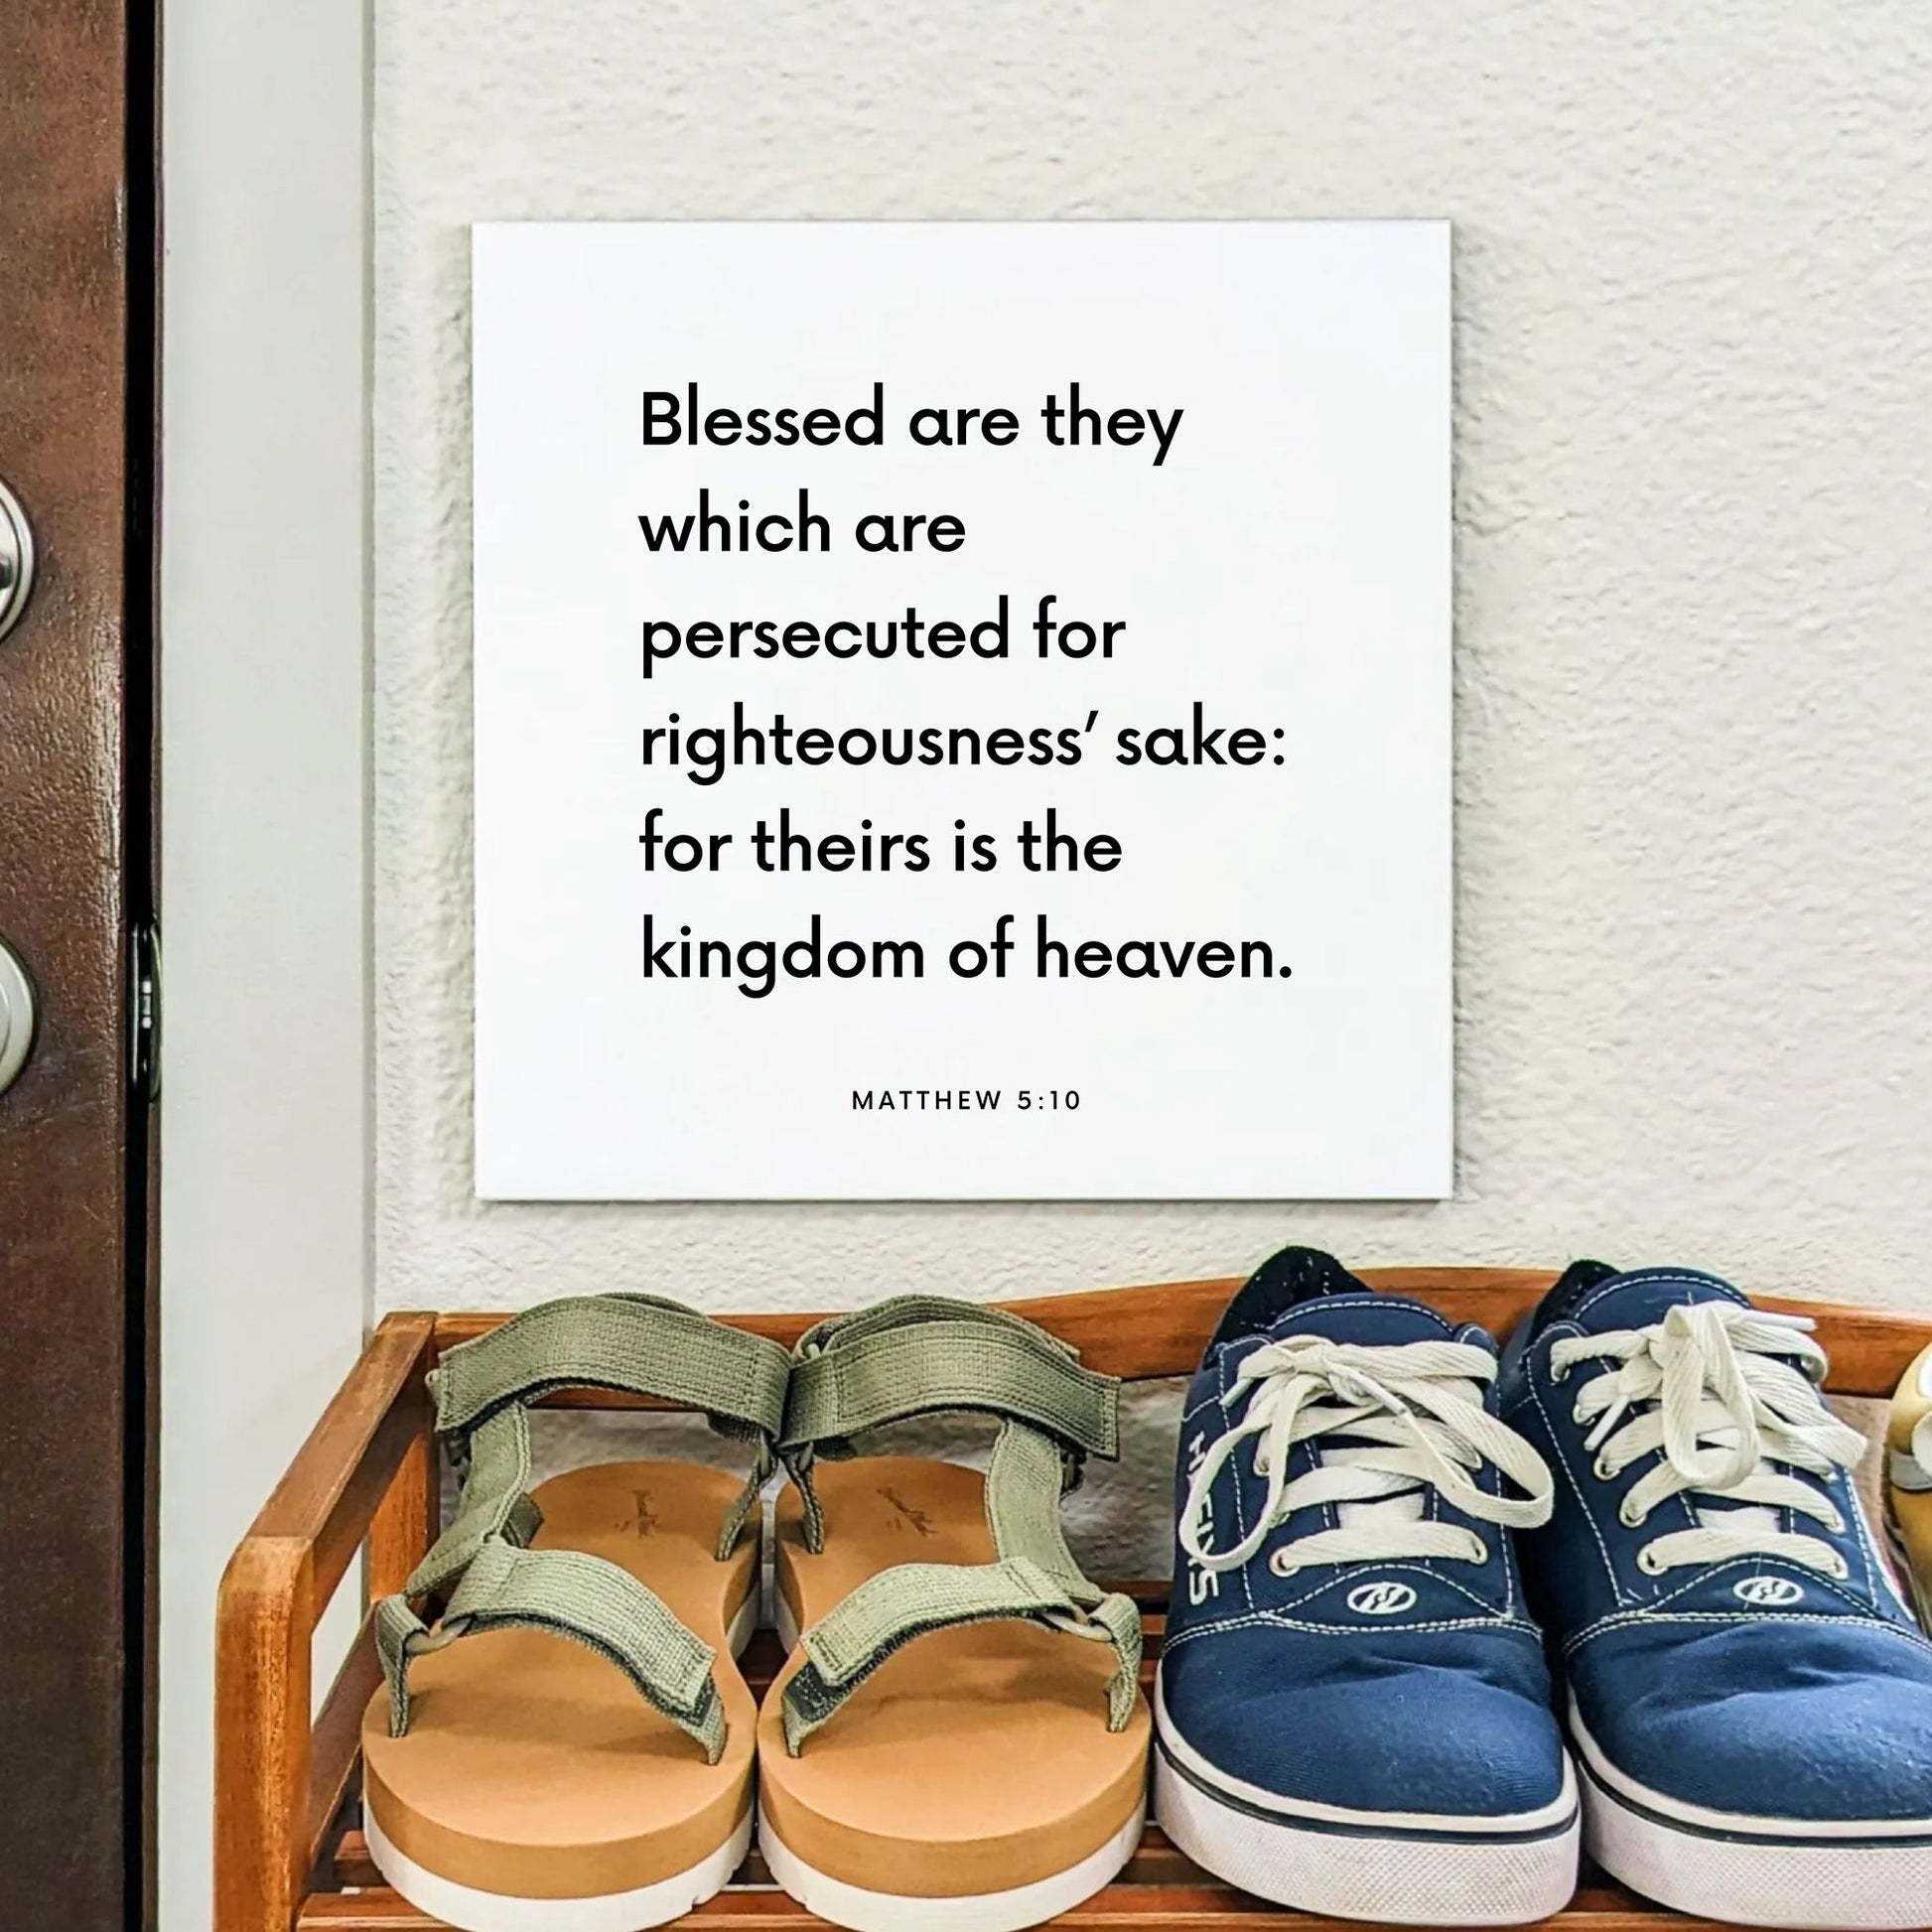 Shoes mouting of the scripture tile for Matthew 5:10 - "Blessed are they which are persecuted for righteousness"